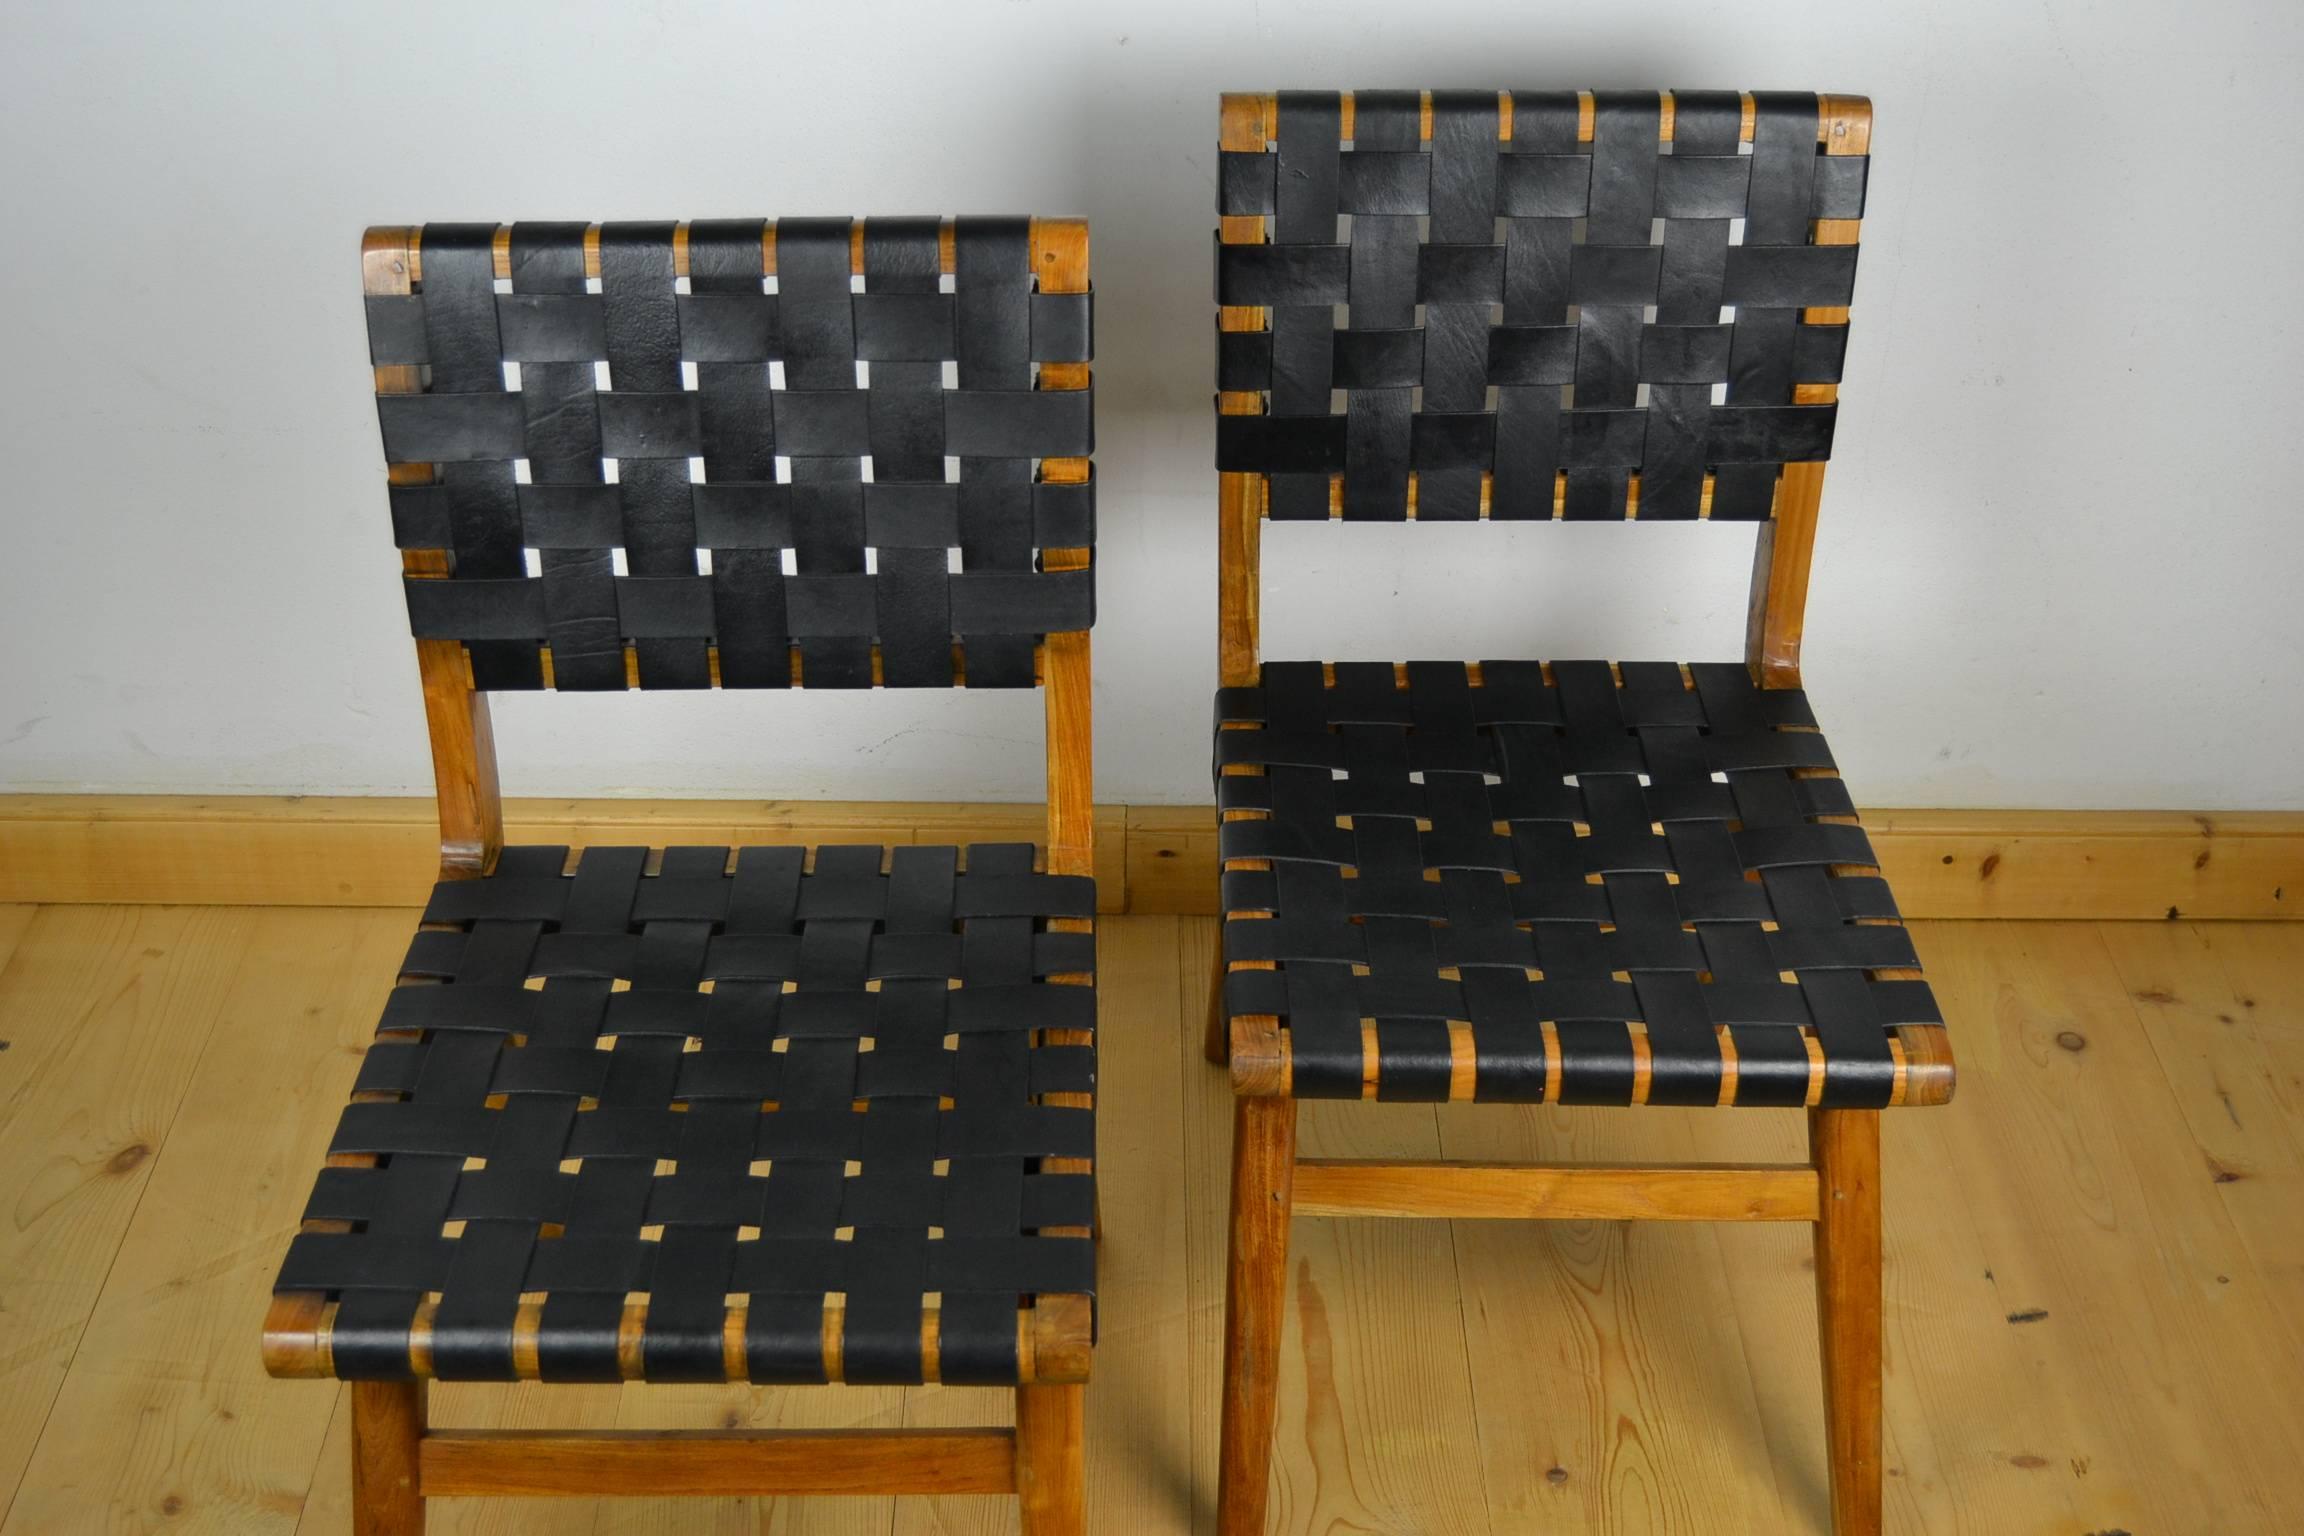 Set of two vintage dining chairs - side chairs in the style of Jens Risom & Mel Smilow. Black leather webbing chairs circa 1950 with walnut frame.
Mid-Century Modern - Scandinavian style. 
Both in good used vintage condition. 
Price is for two